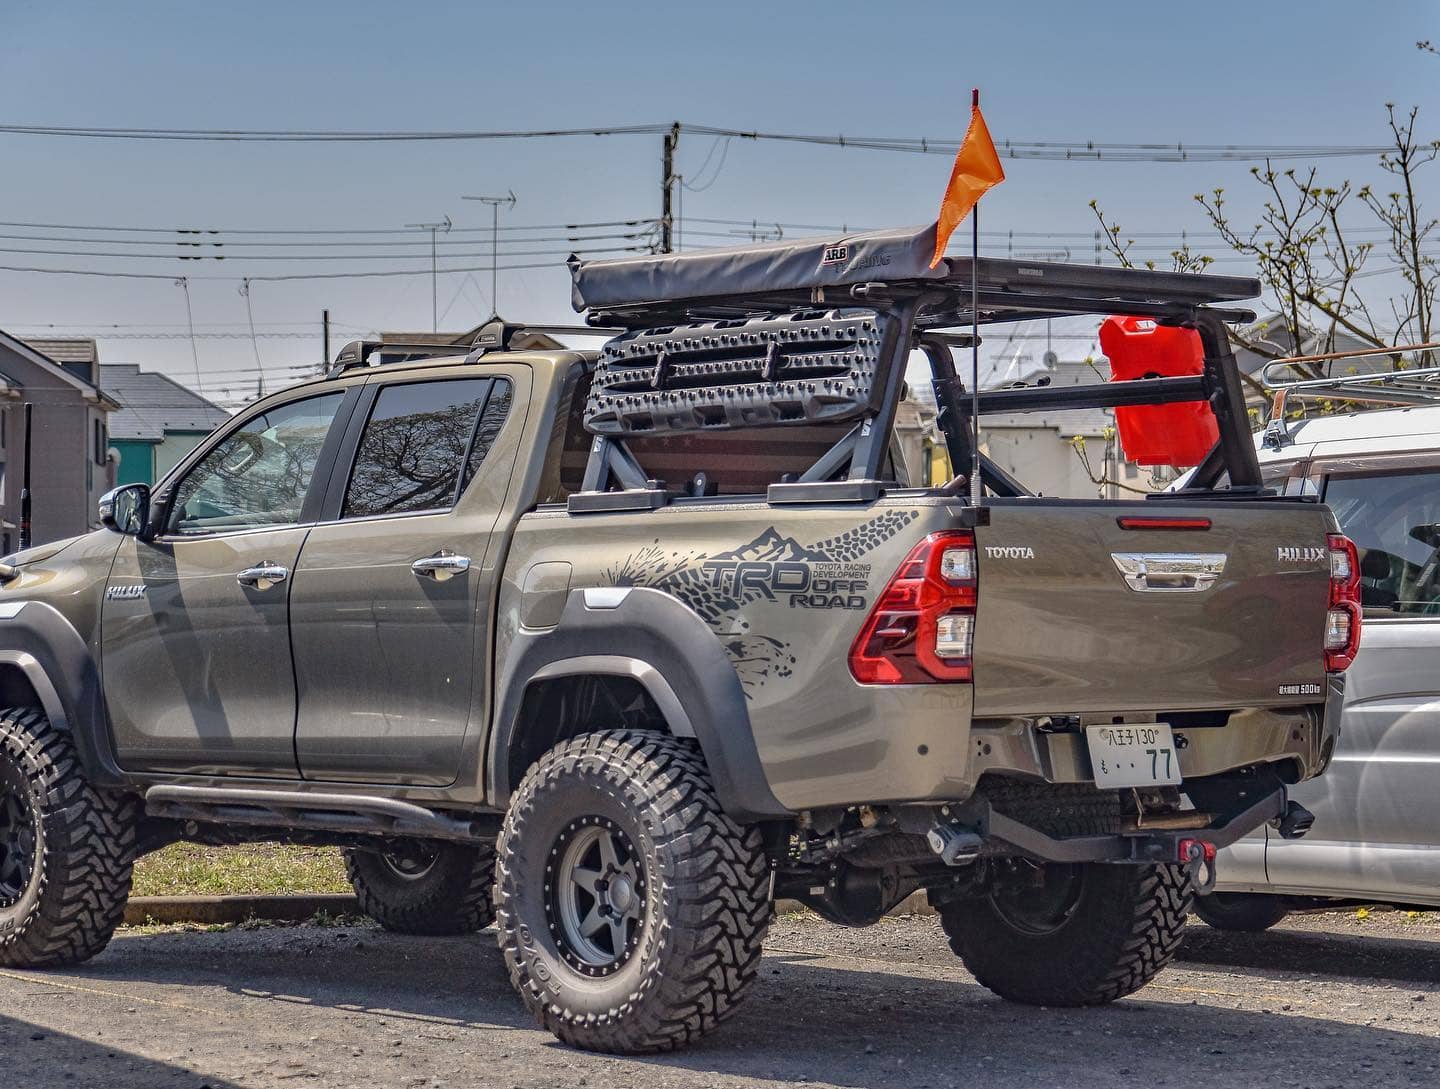 Toyota Hilux Overland-adventure build with Yakima Bed rack, ARB awning, and wide fender flares